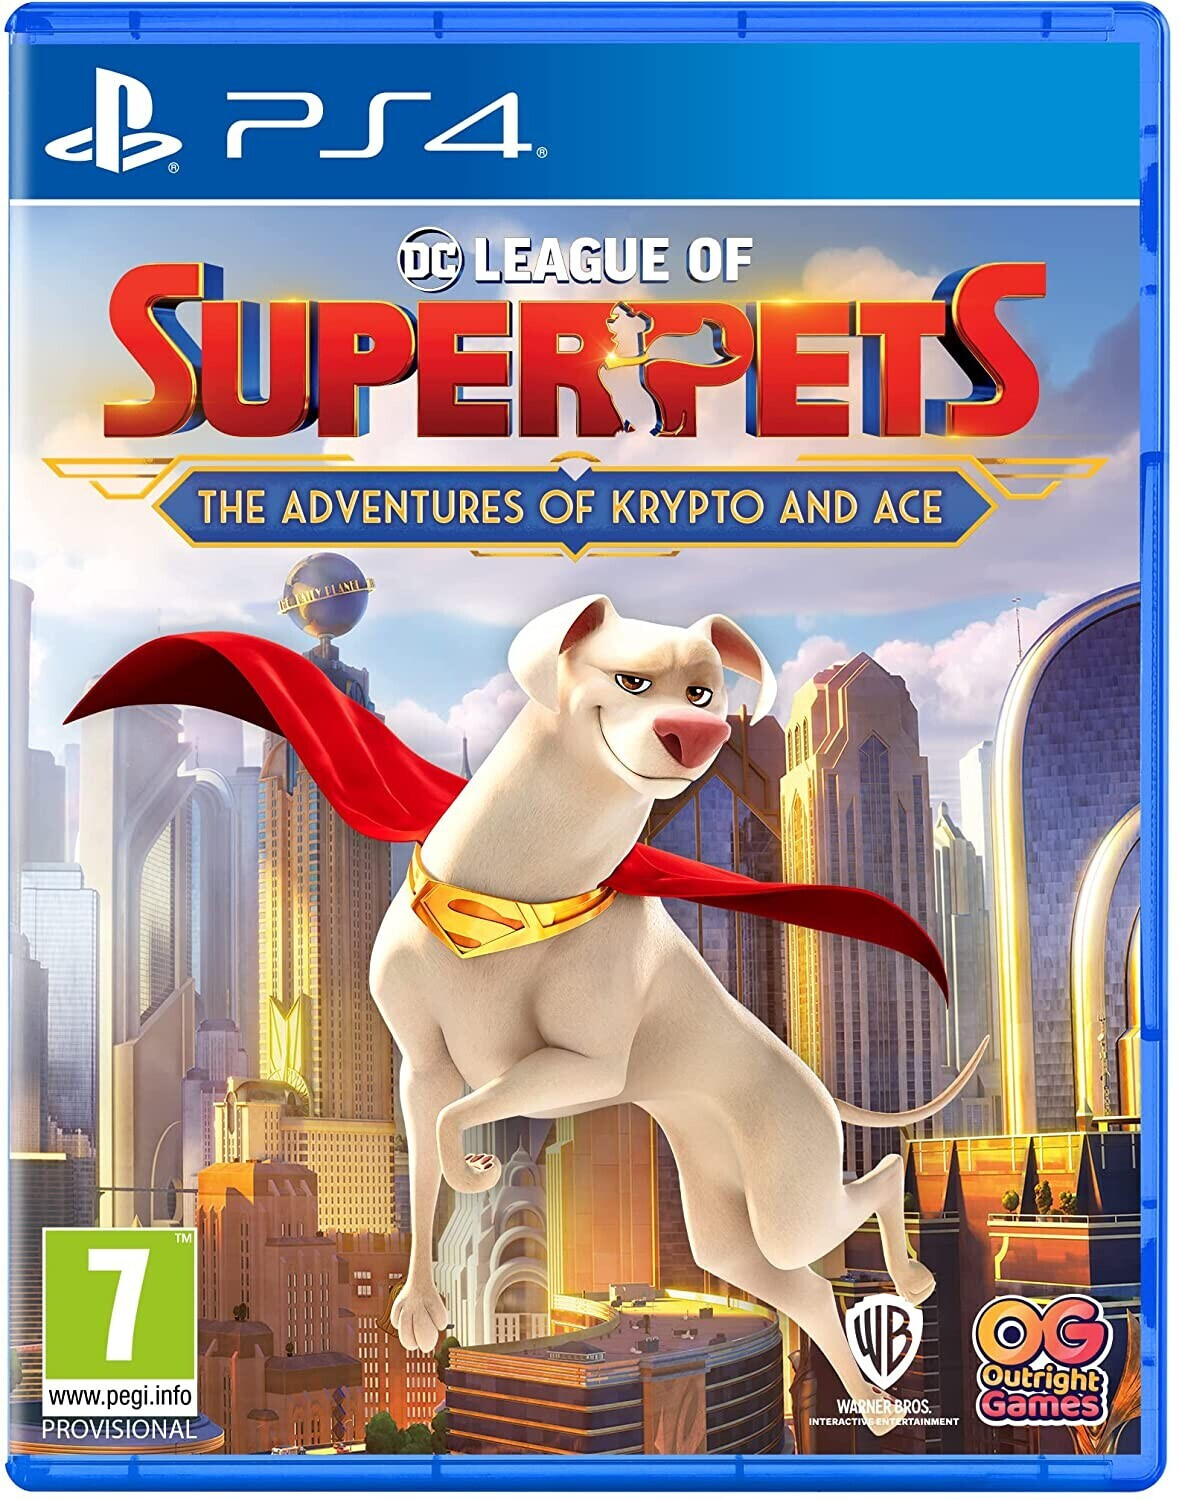 Photos - Game Bandai Namco  DC League of Super-Pets: The Adventures of Krypto and A